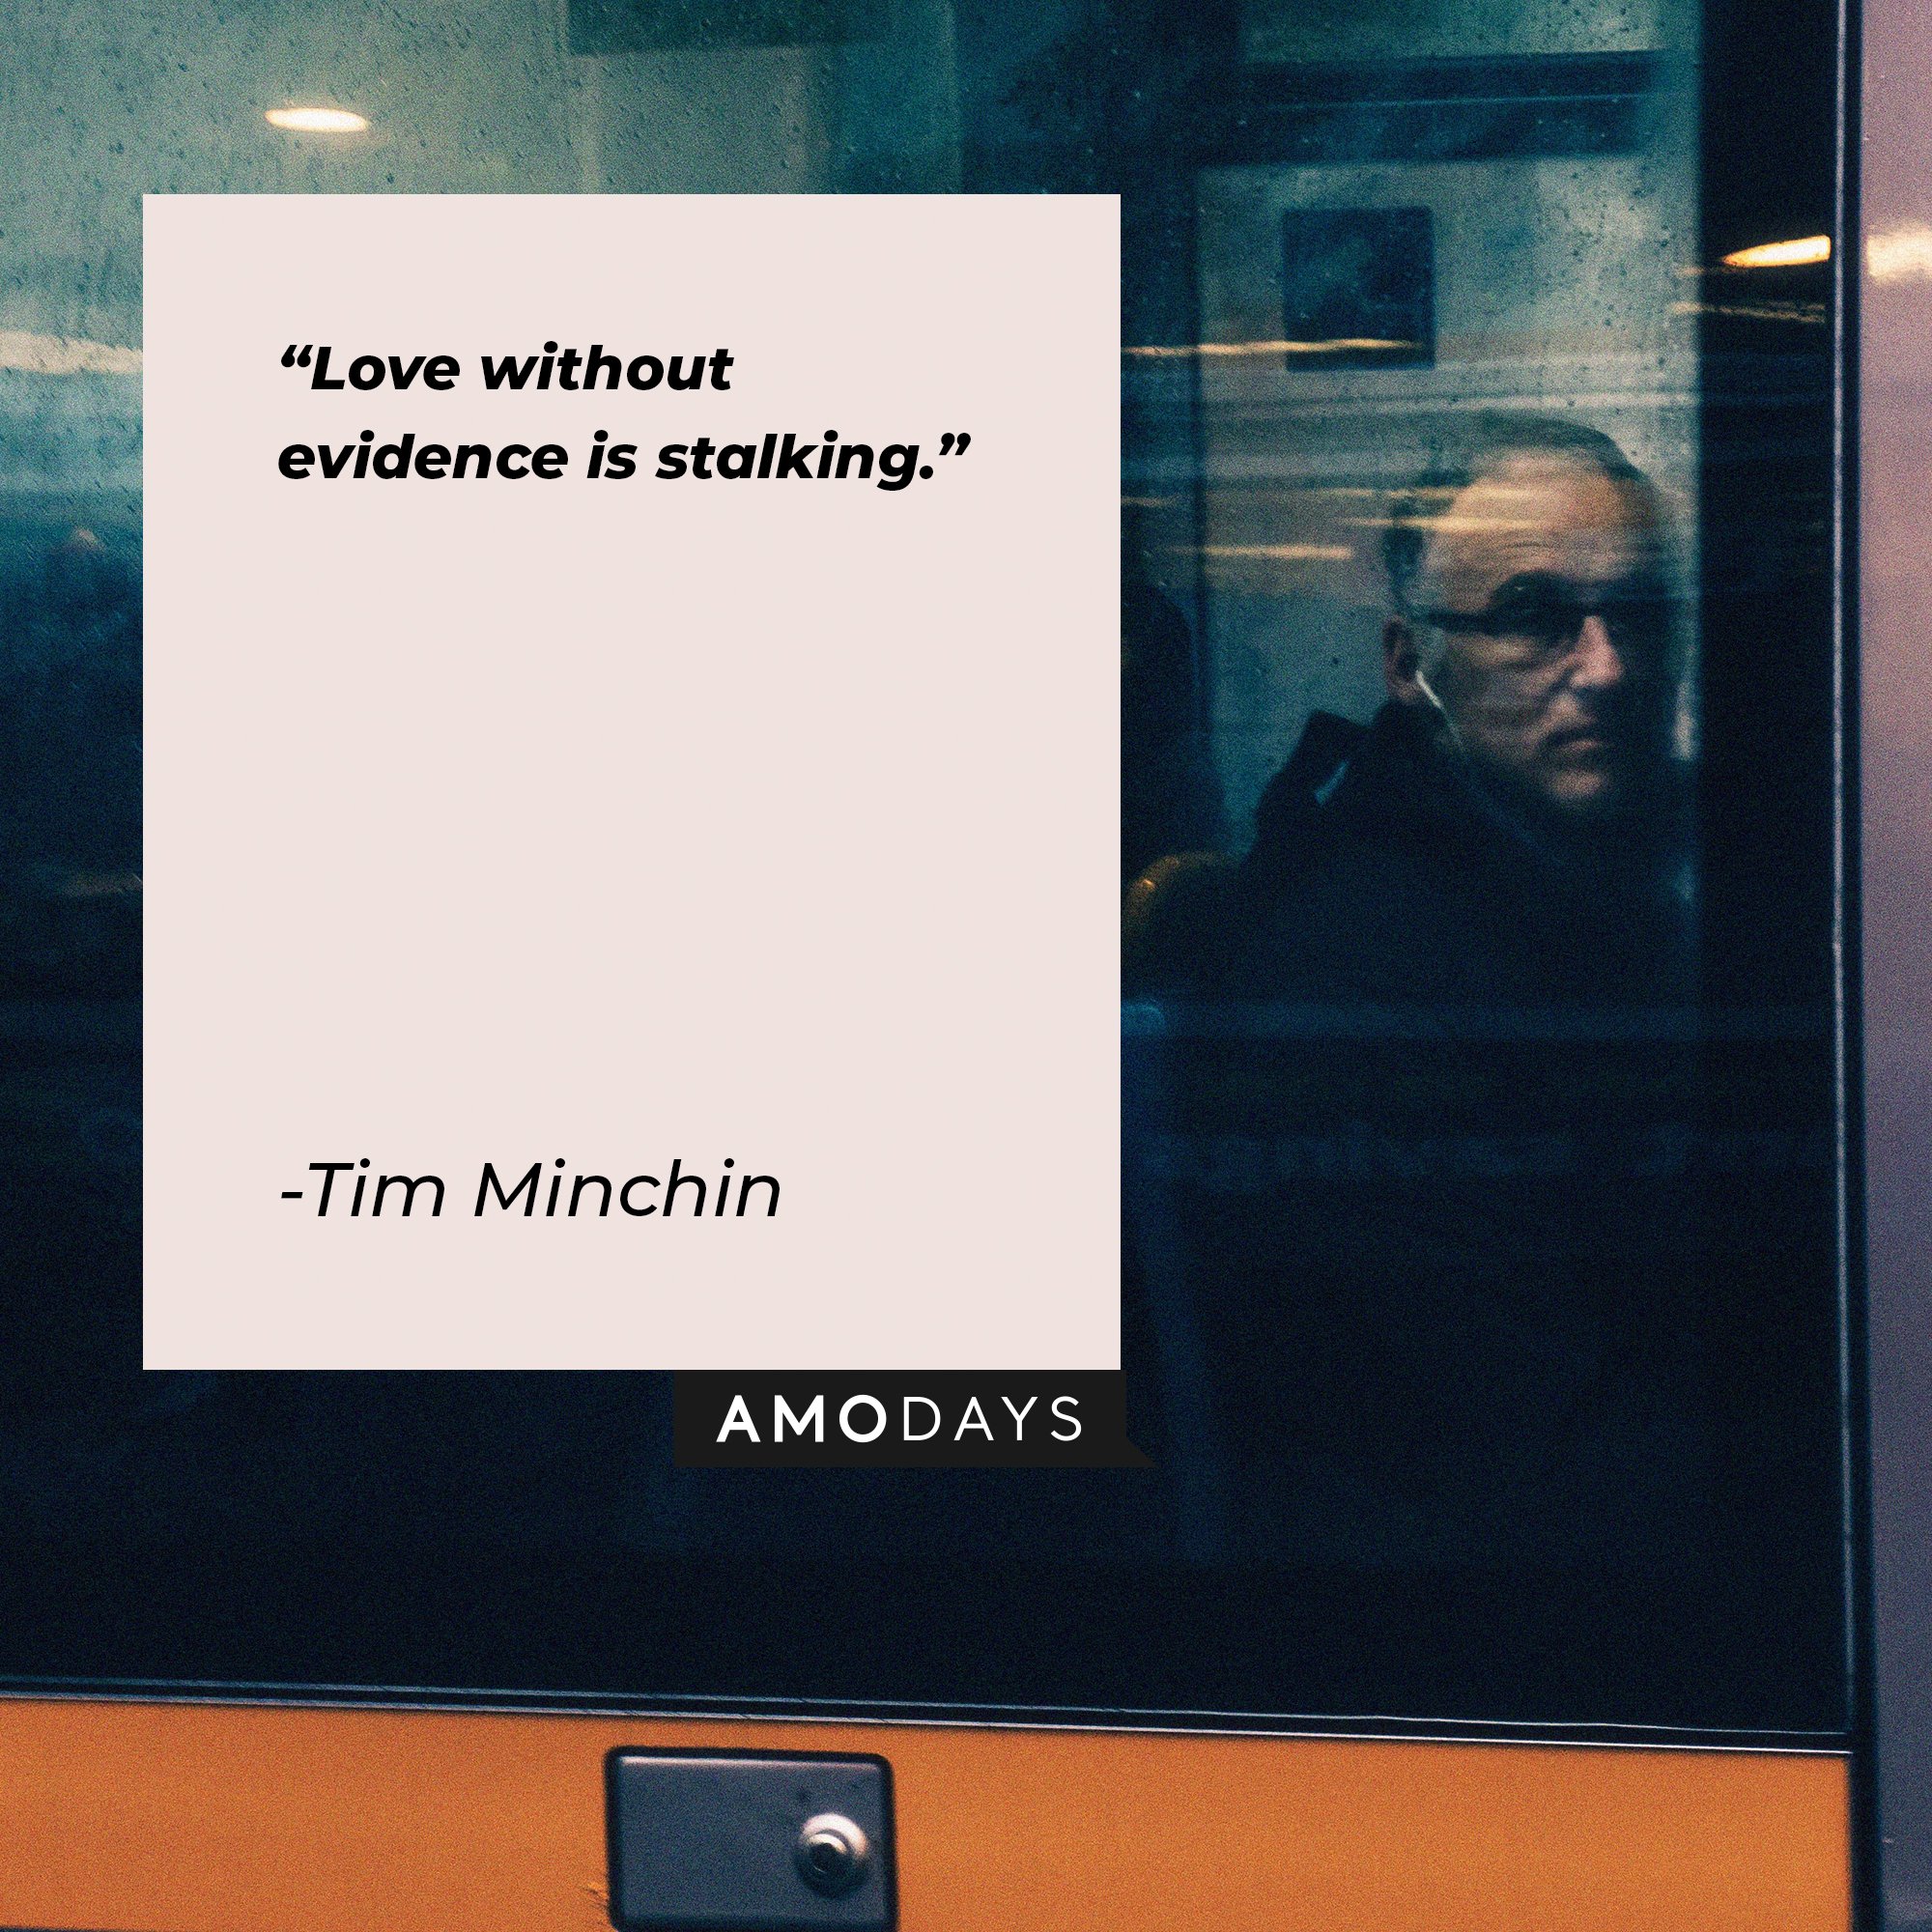 Tim Minchin’s quote: "Love without evidence is stalking." | Image: AmoDays